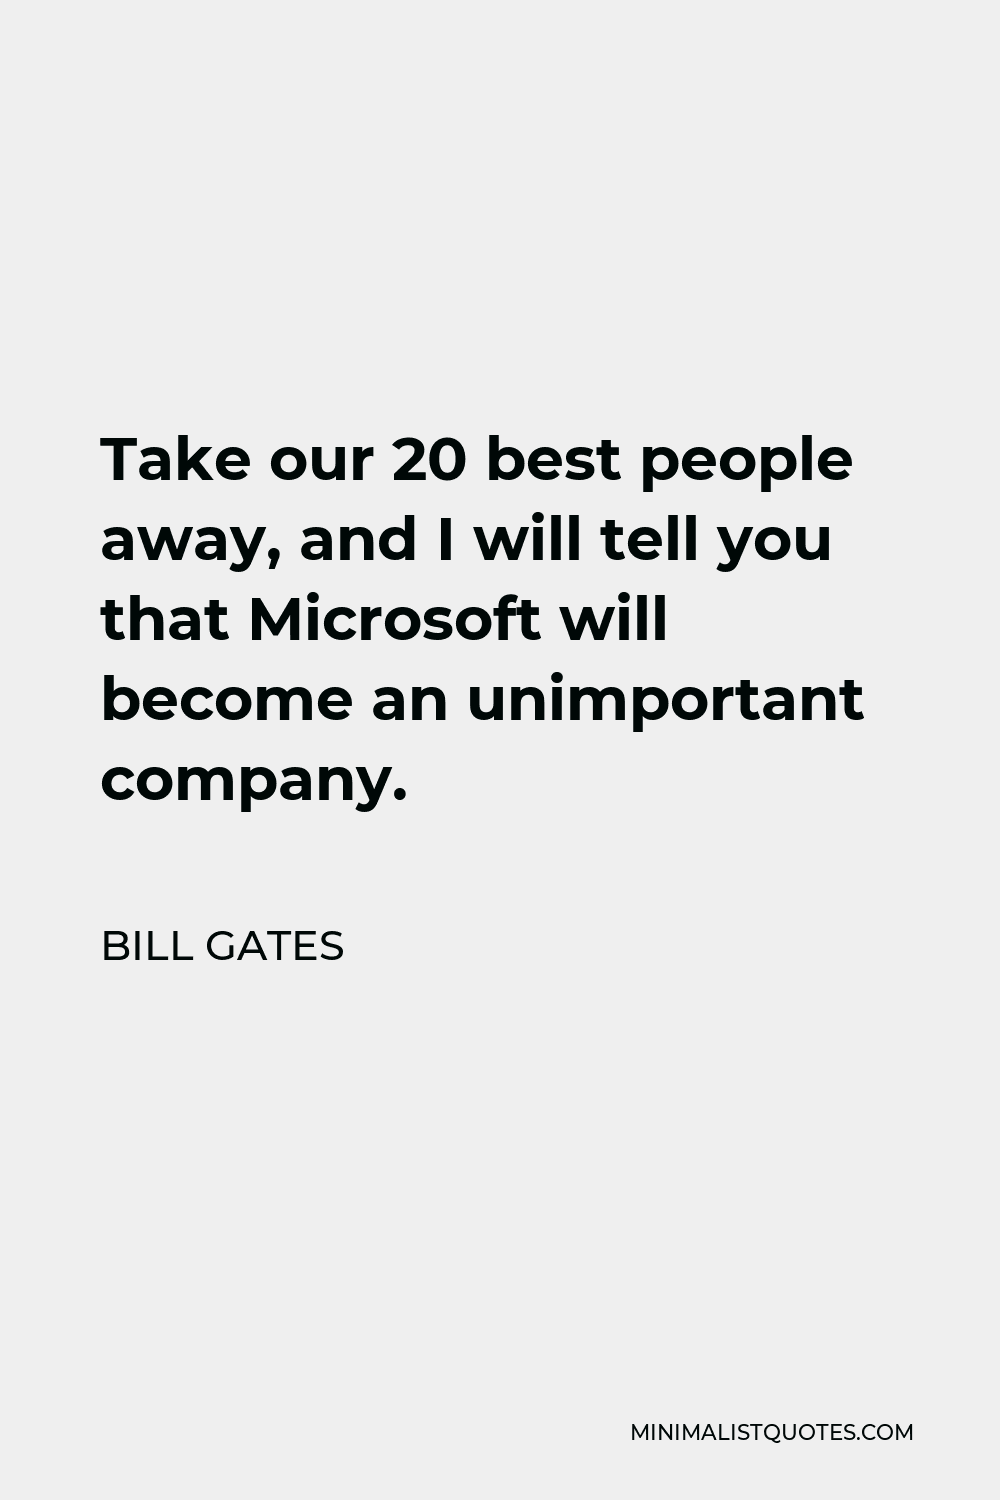 Bill Gates Quote - Take our 20 best people away, and I will tell you that Microsoft will become an unimportant company.